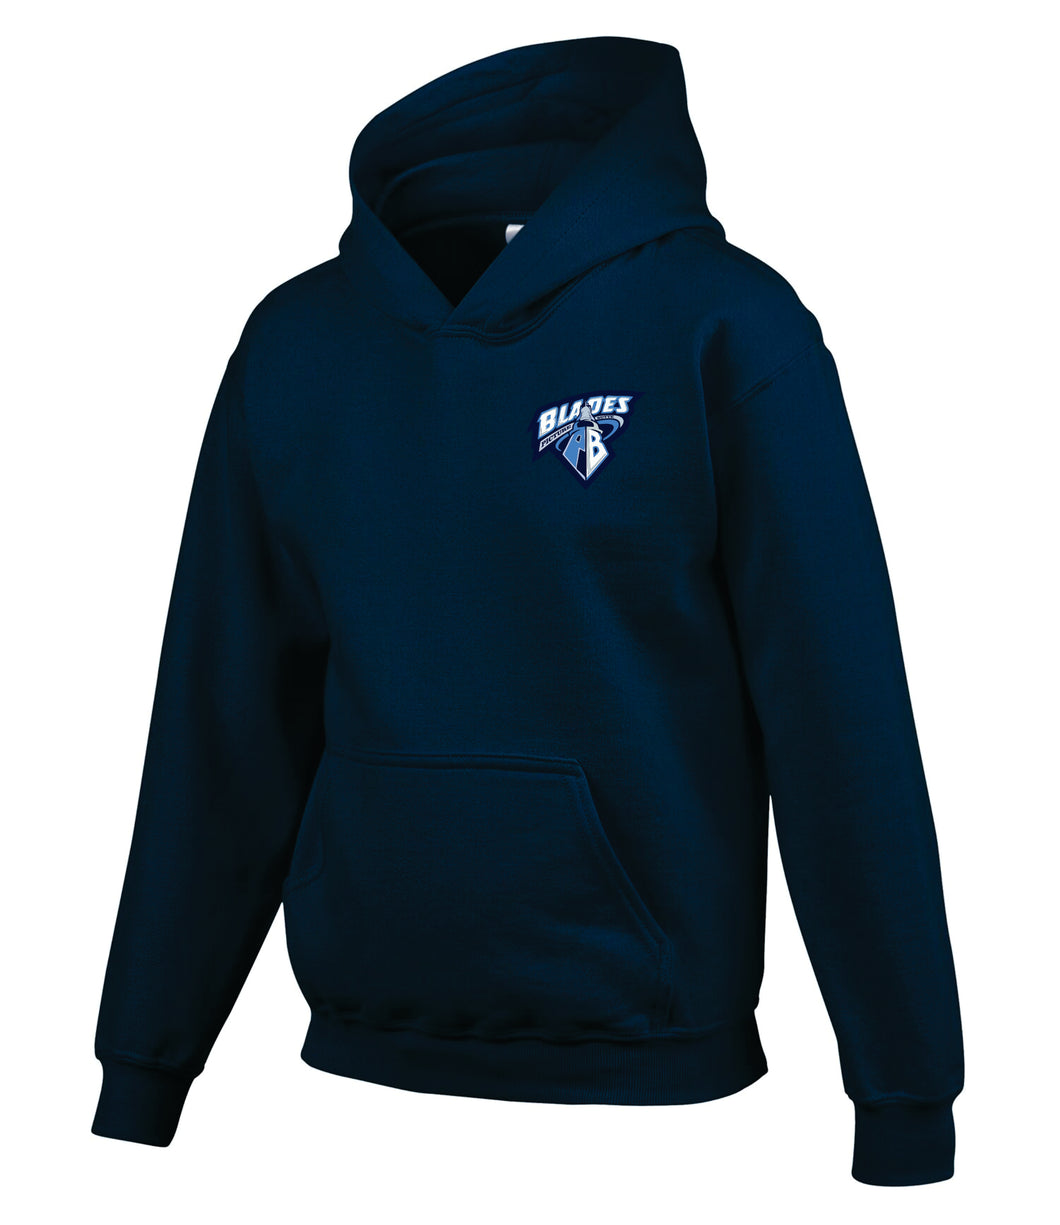 COTTON HOODIE WITH PB BLADES LOGO ADULT